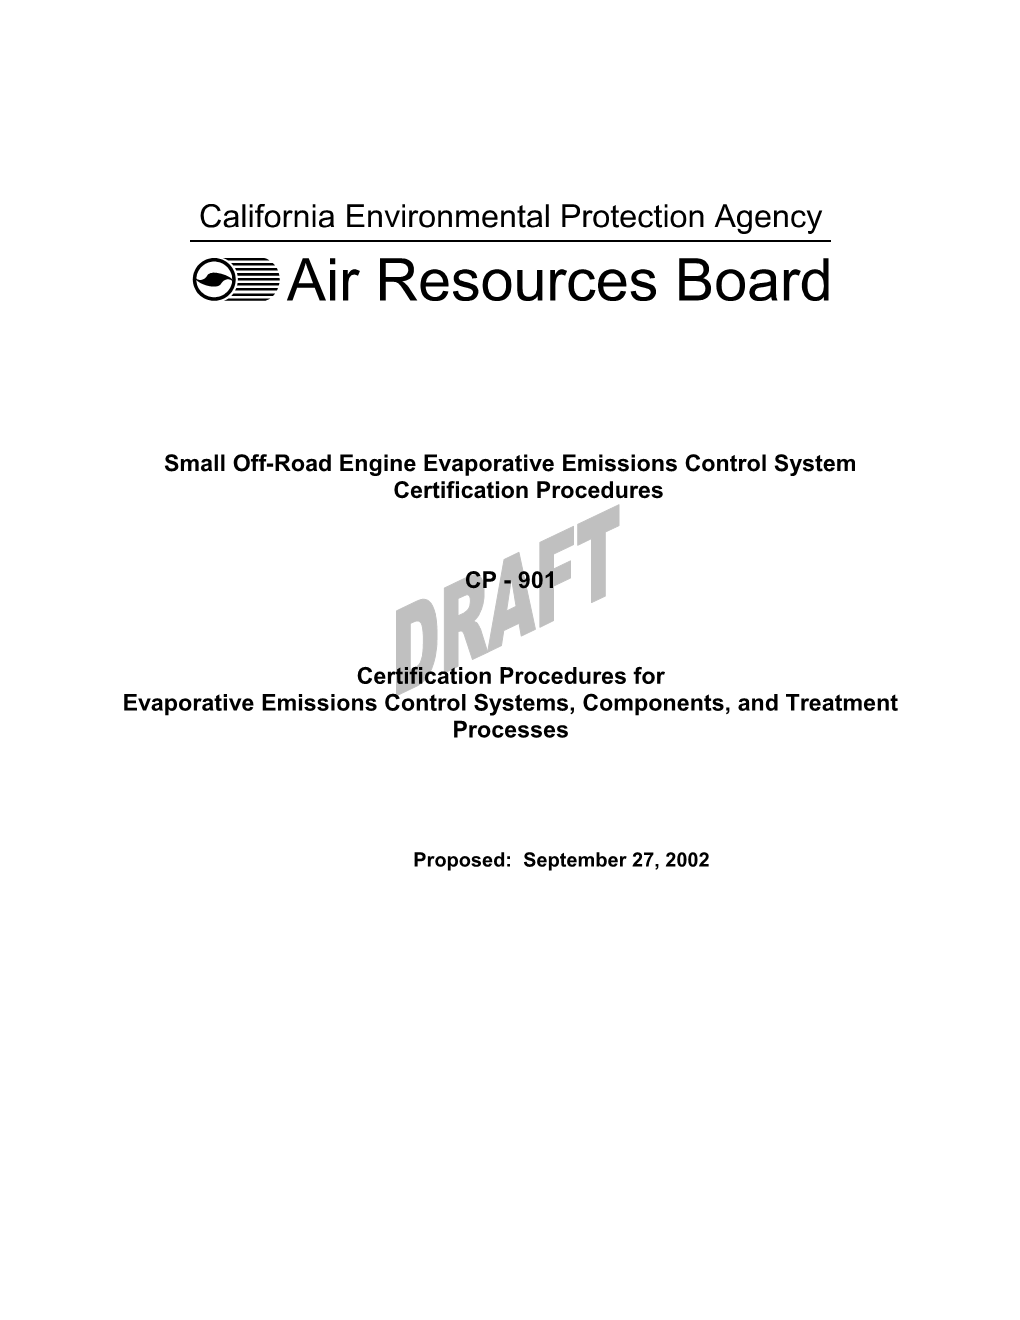 Small Off-Road Engine Evaporative Emissions Control System Certification Procedures